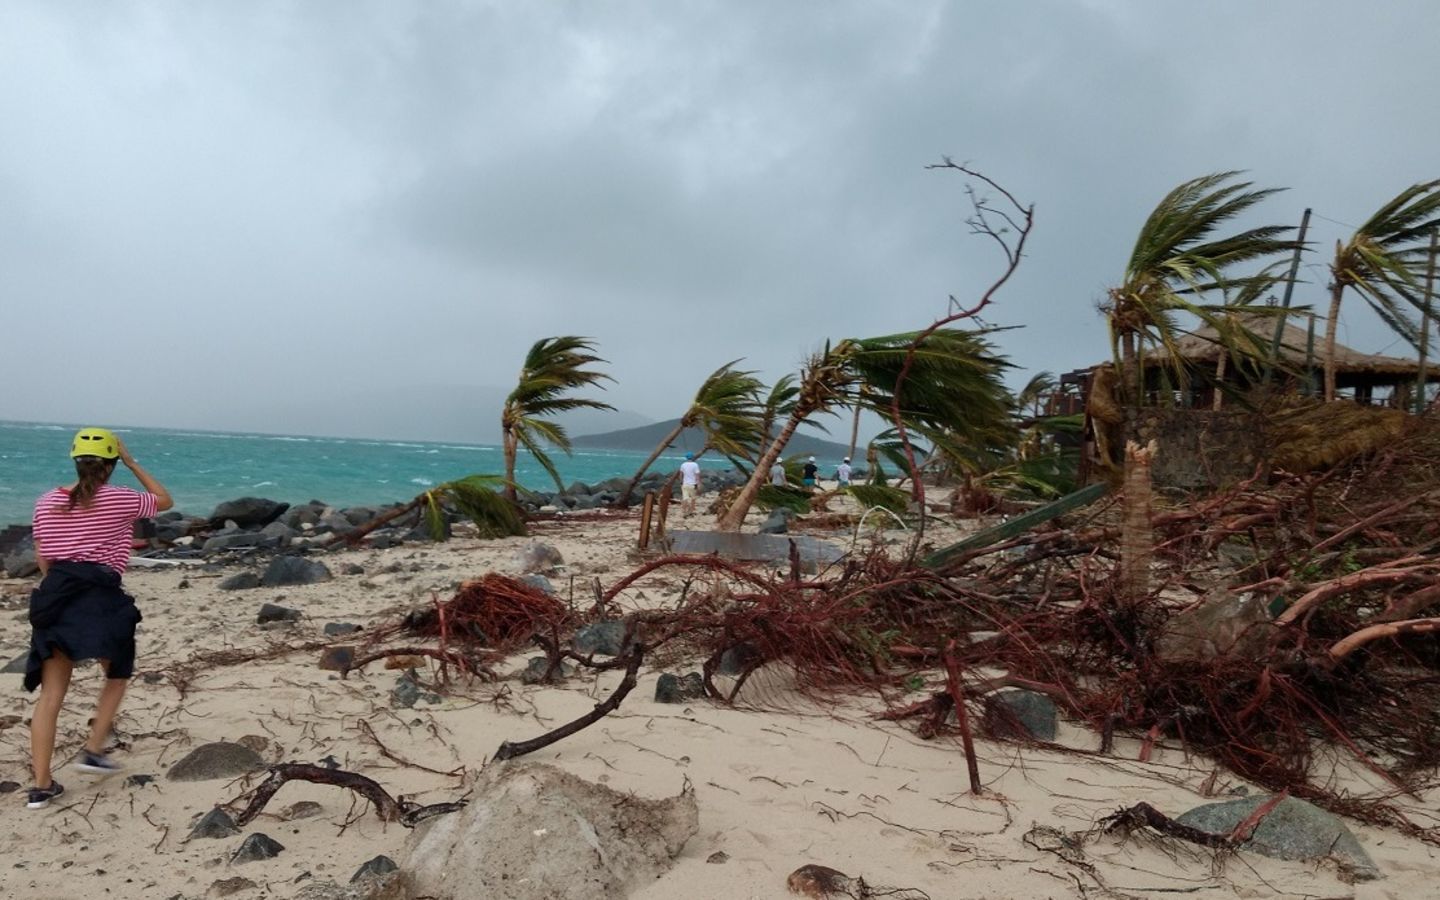 Destroyed trees on the beach